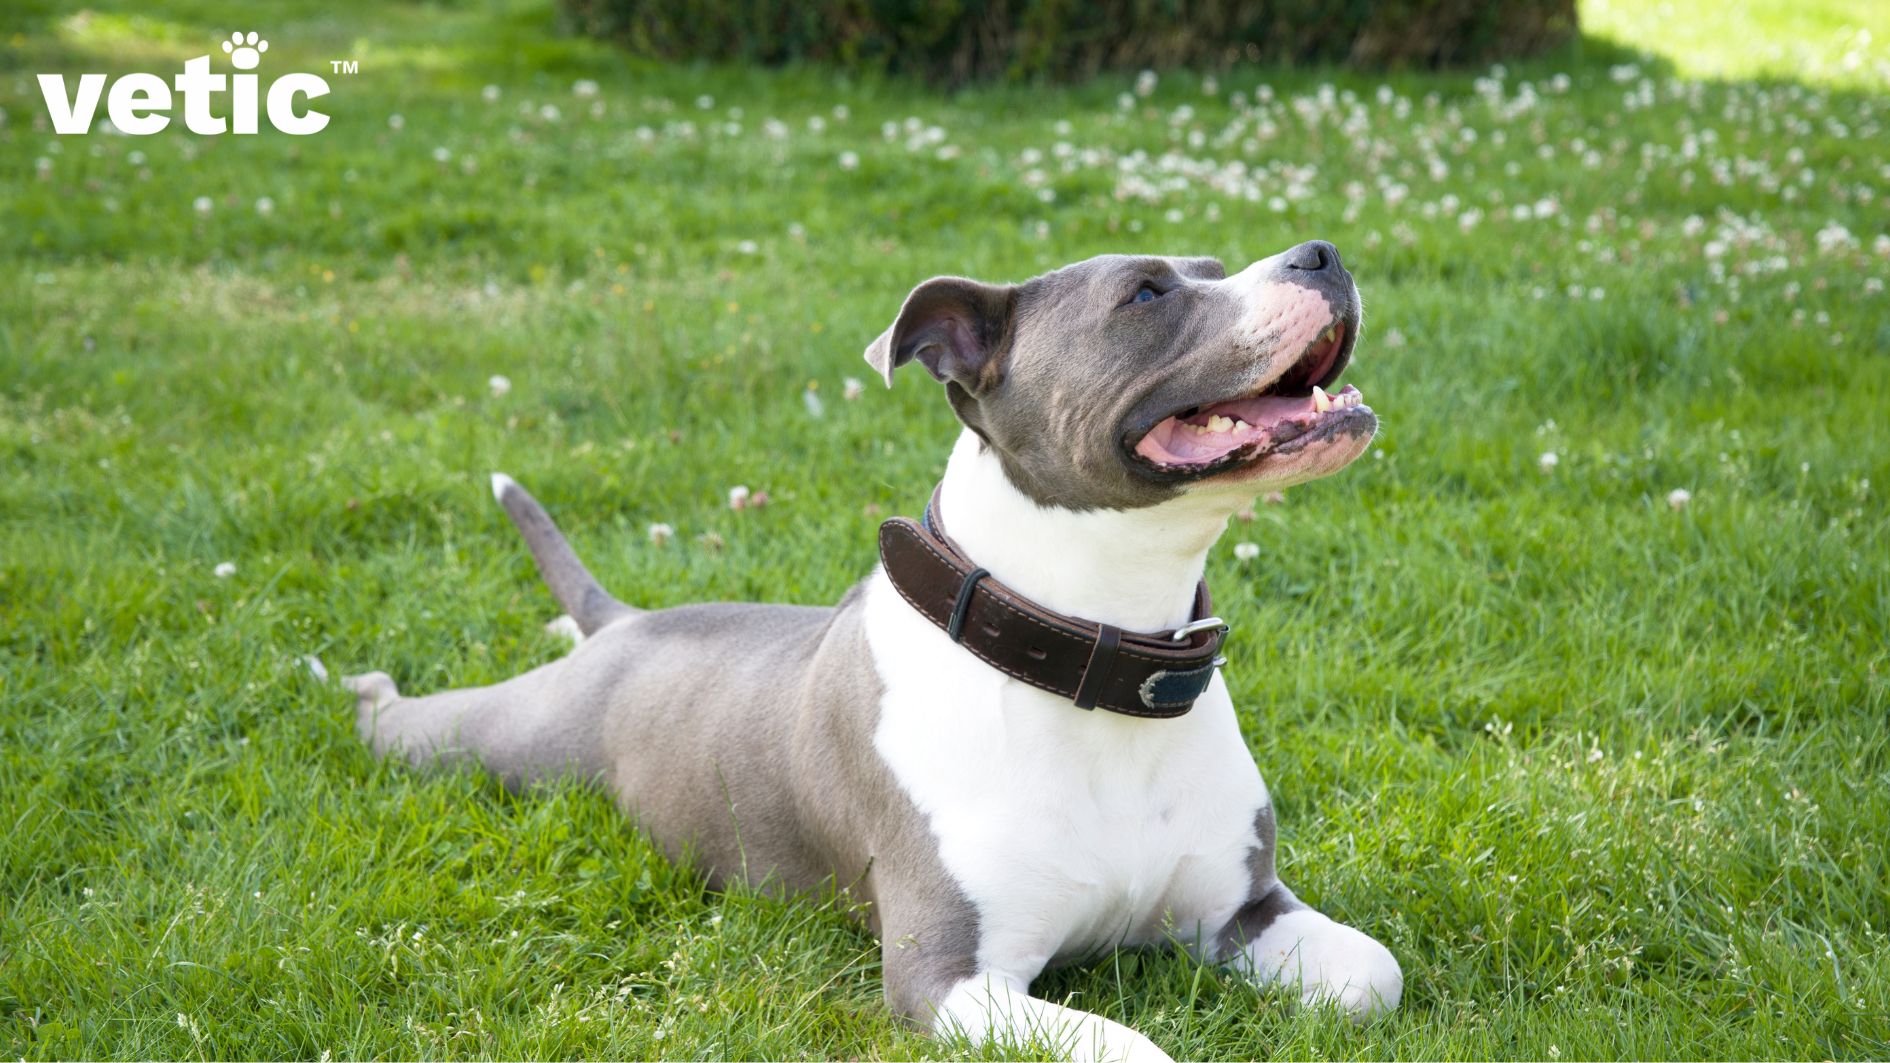 a pitbull puppy sitting with their legs splayed on the green grass. the puppy is wearing a brown and black broad belt.